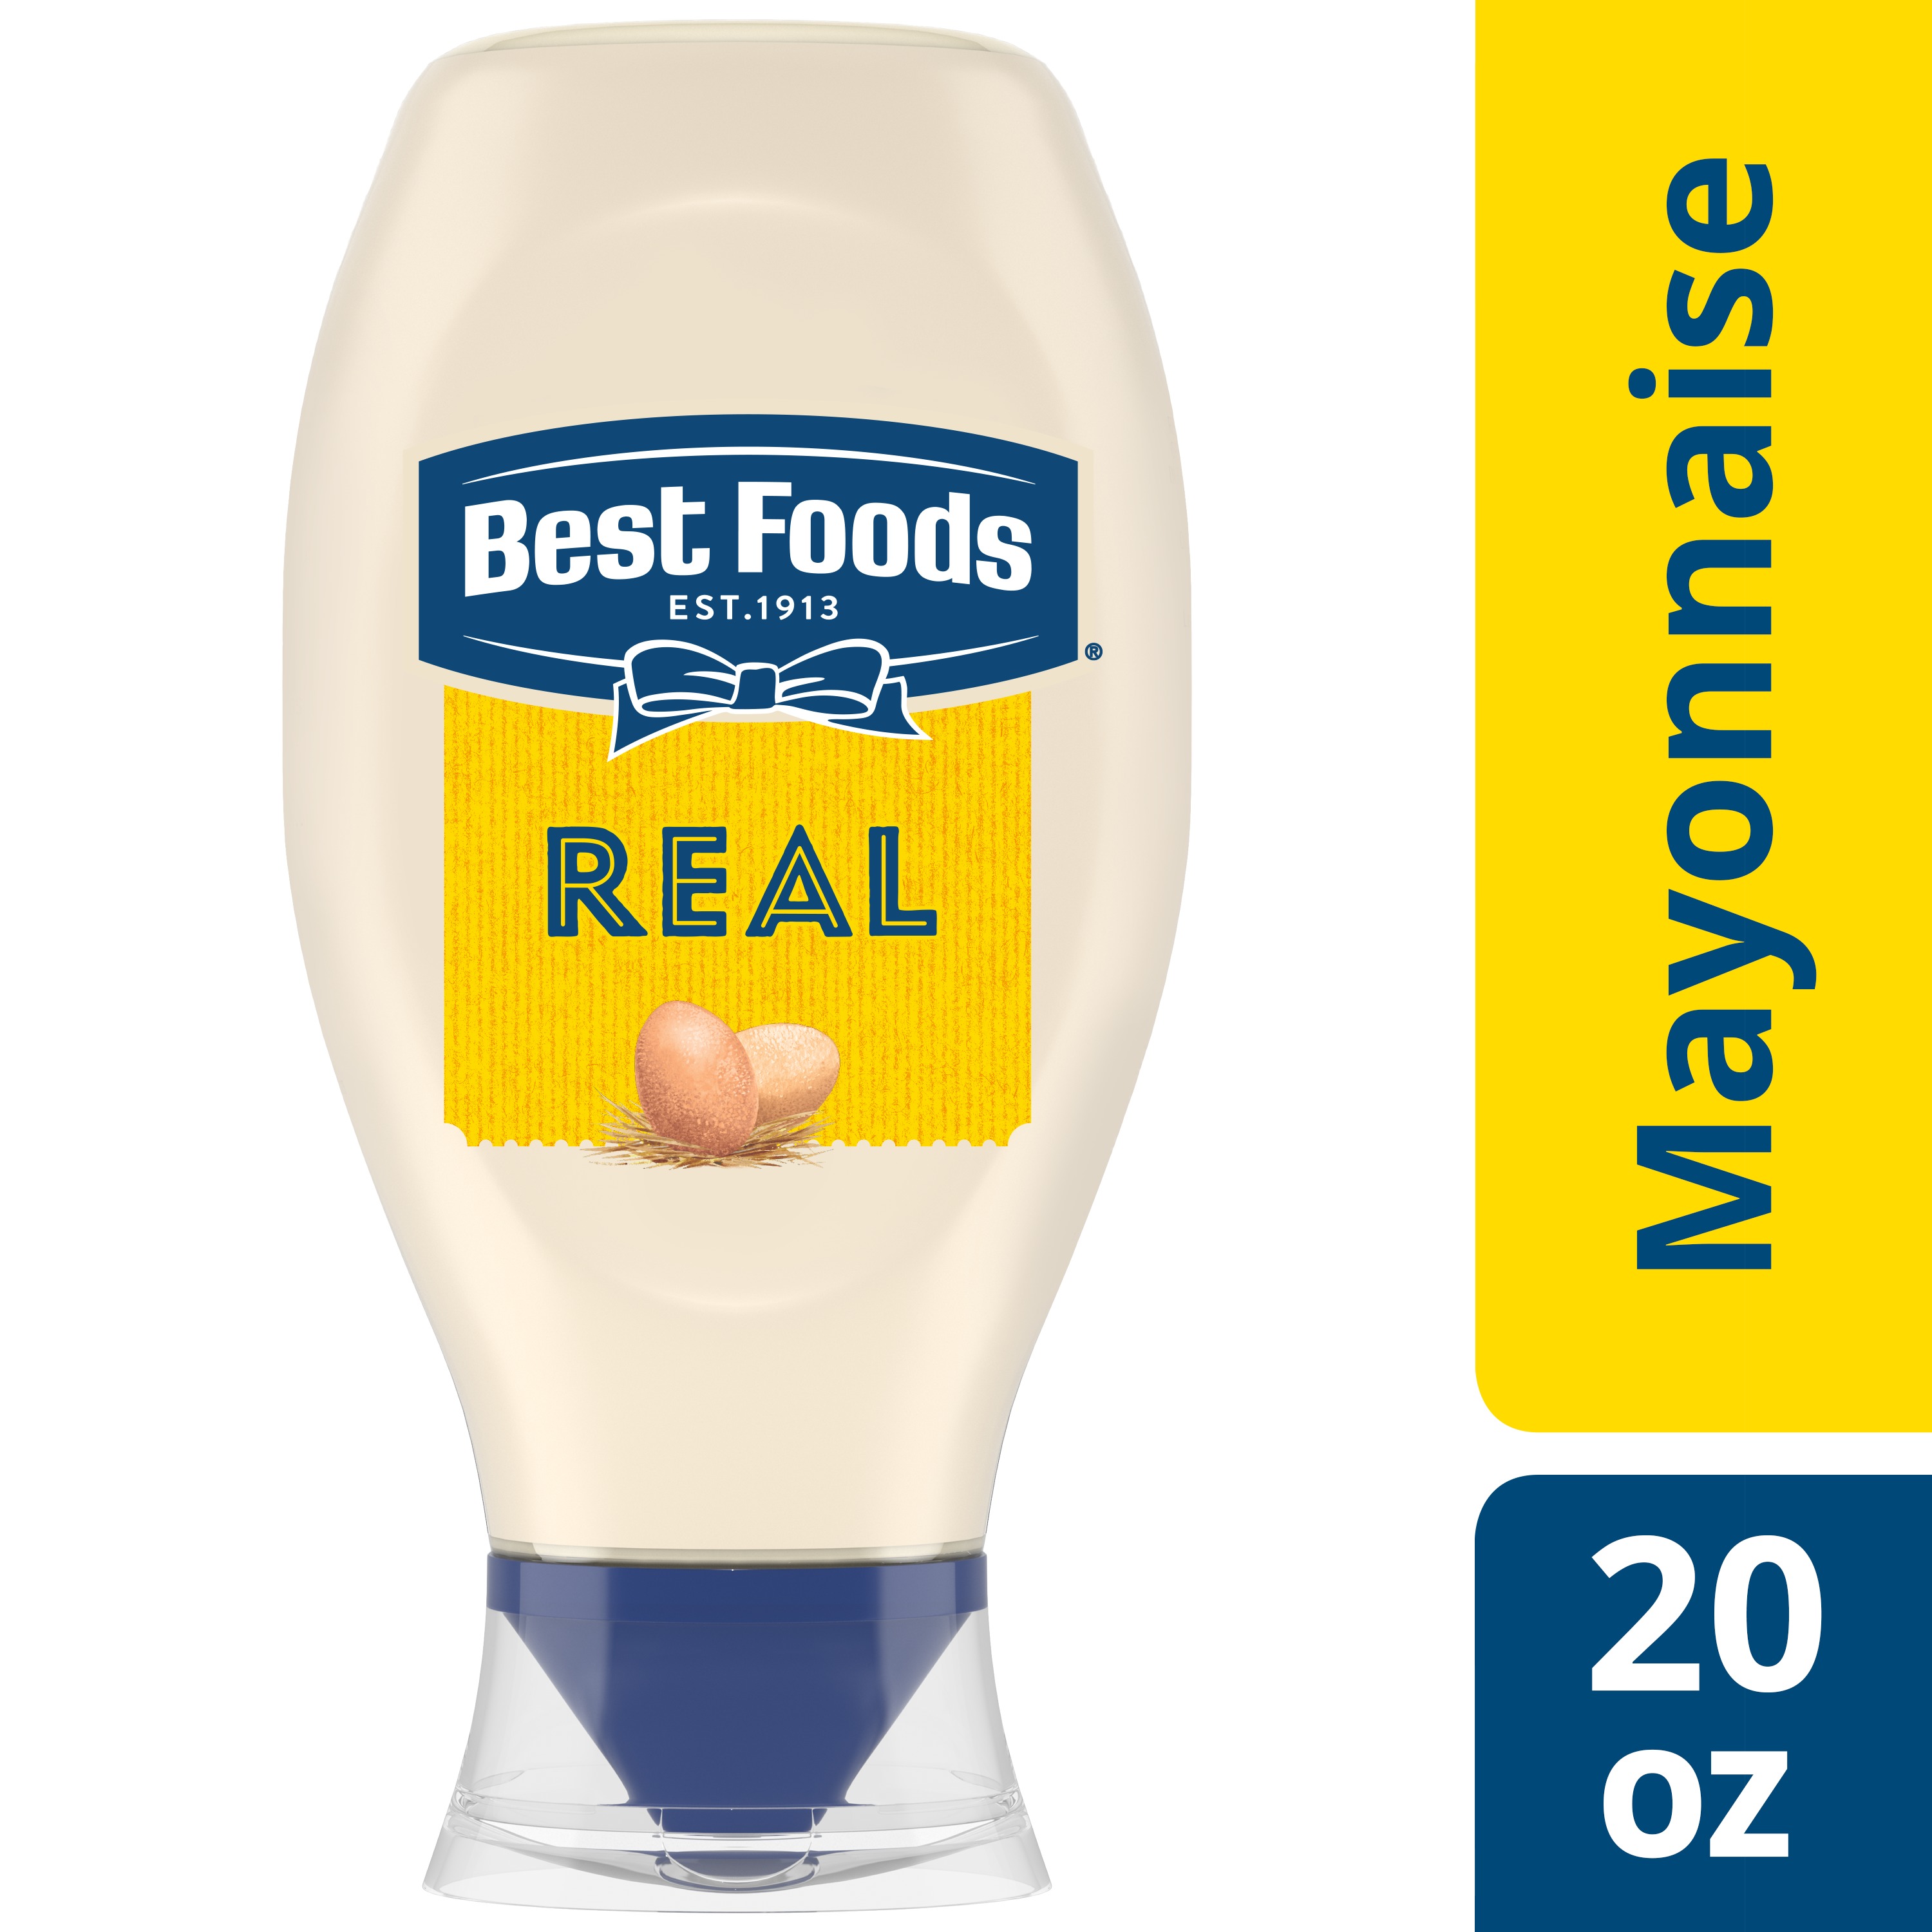 Best Foods Real Mayonnaise Real Mayo Squeeze Bottle 20 oz - Walmart.com ...